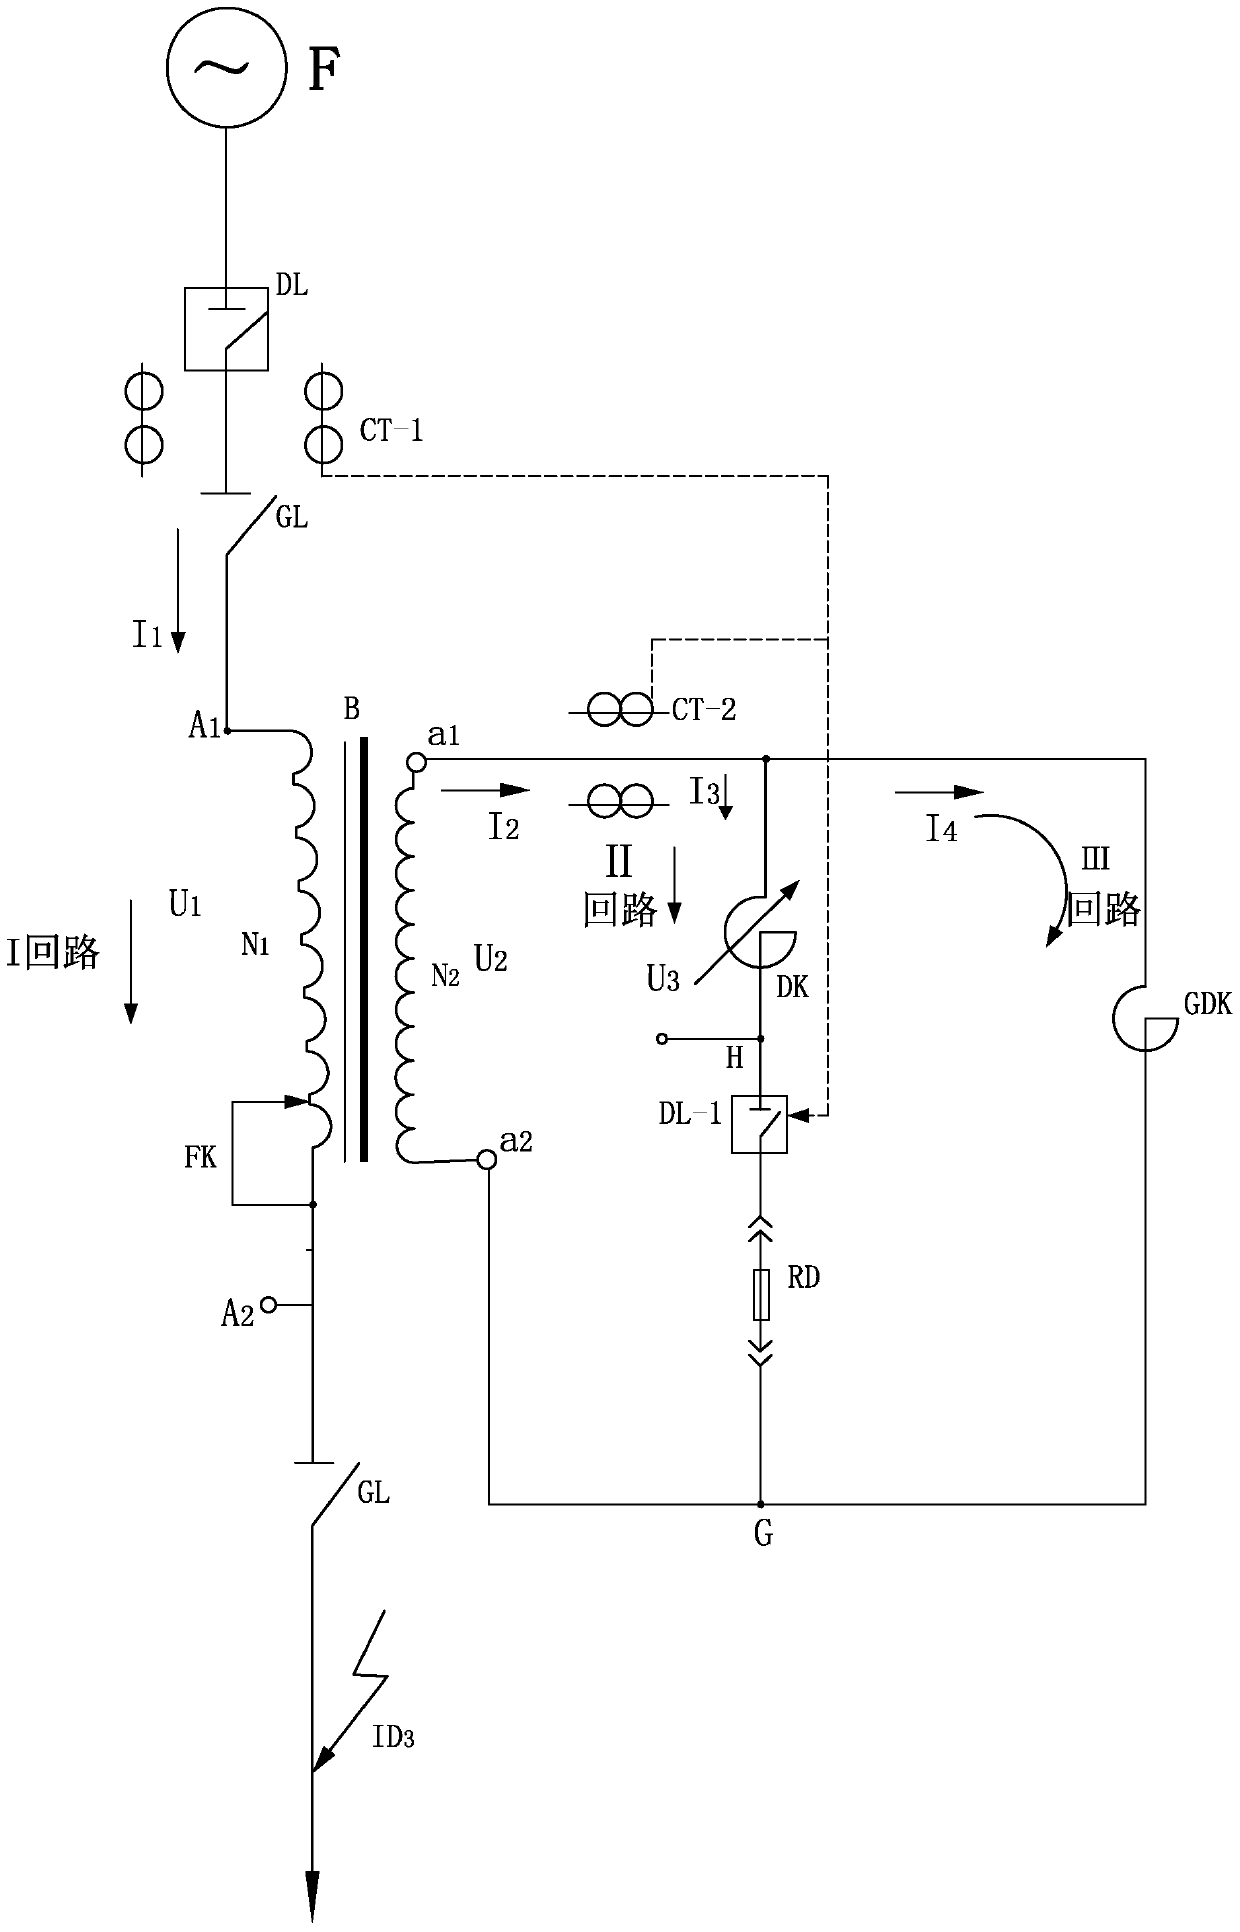 A device for automatically limiting short-circuit fault current in AC grid